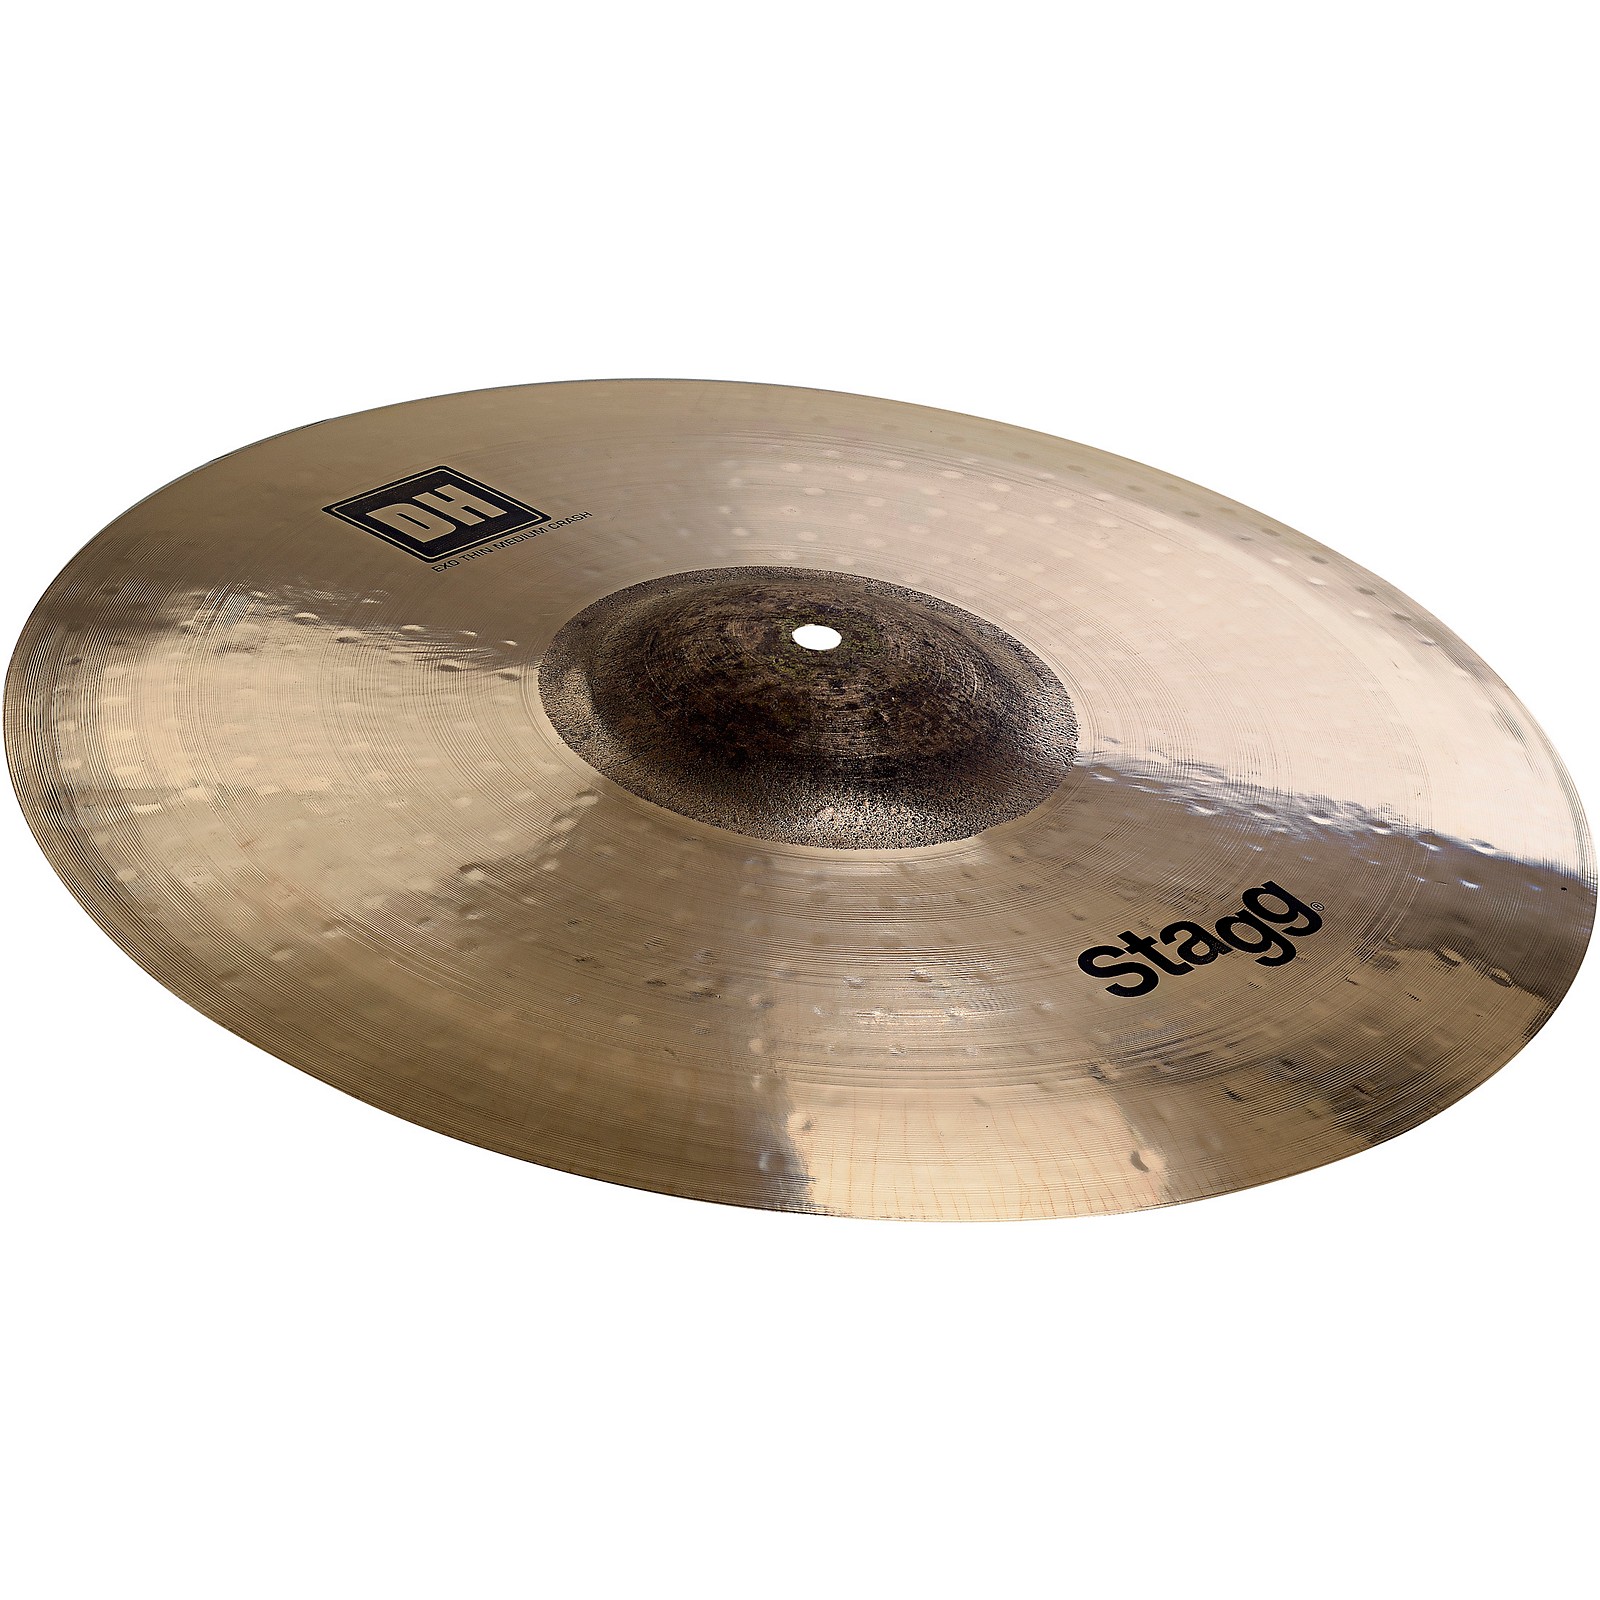 Stagg DH Dual-Hammered Exo Medium Thin Crash Cymbal 16 in. | Musician's